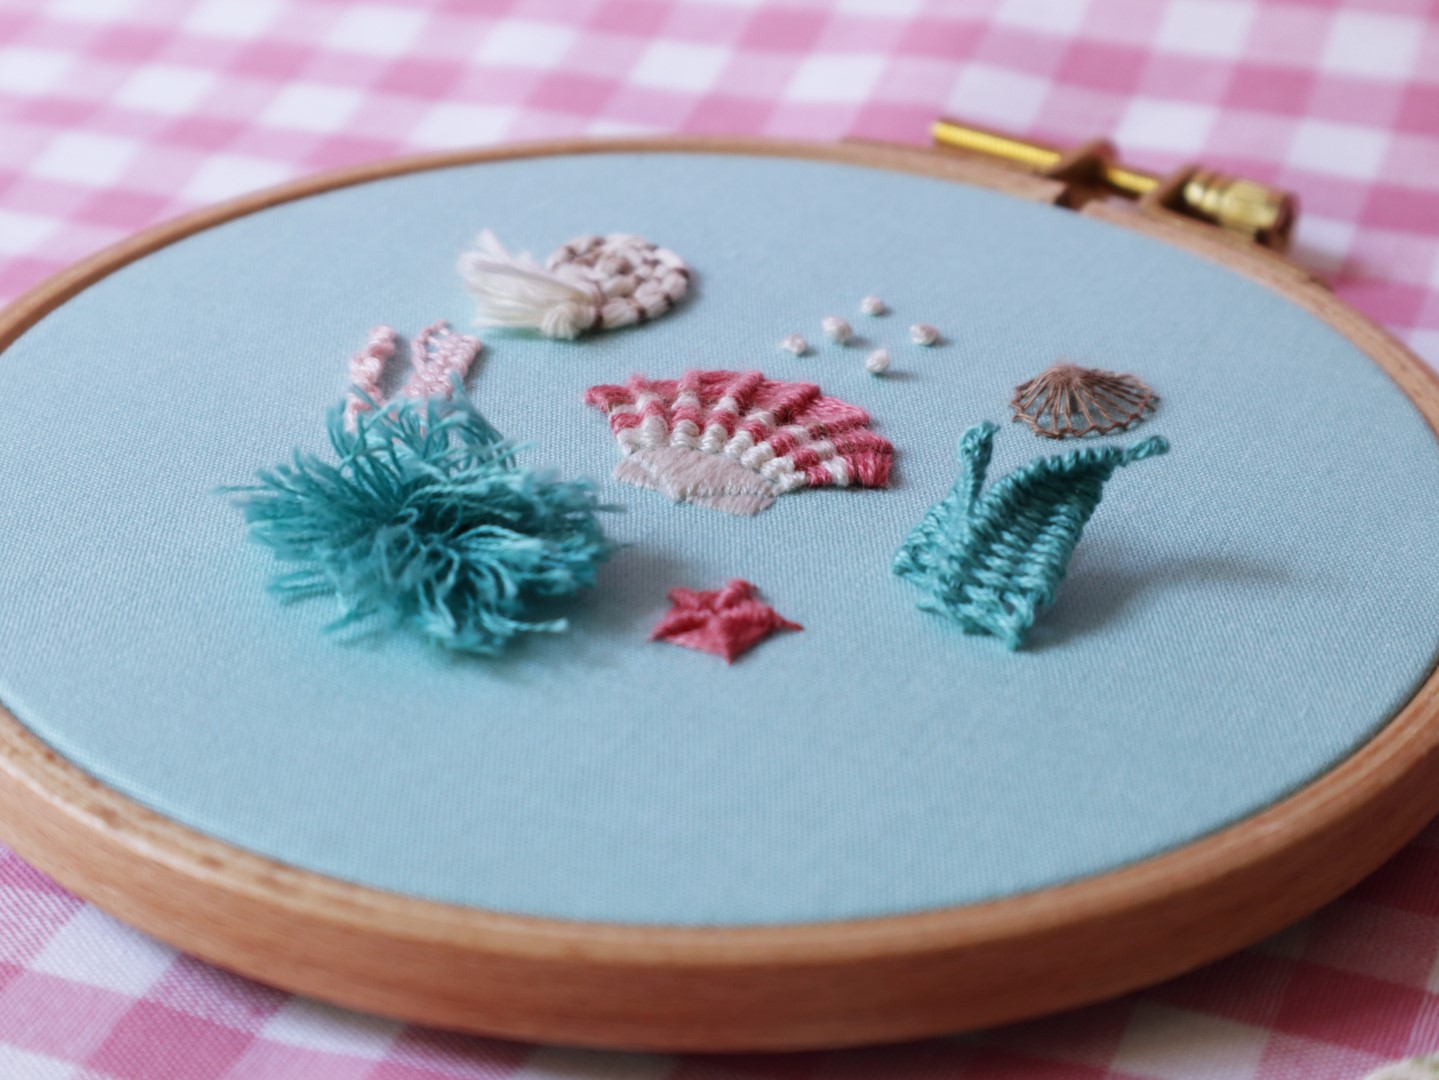 Protected: Under The Sea: Introduction to Raised Embroidery